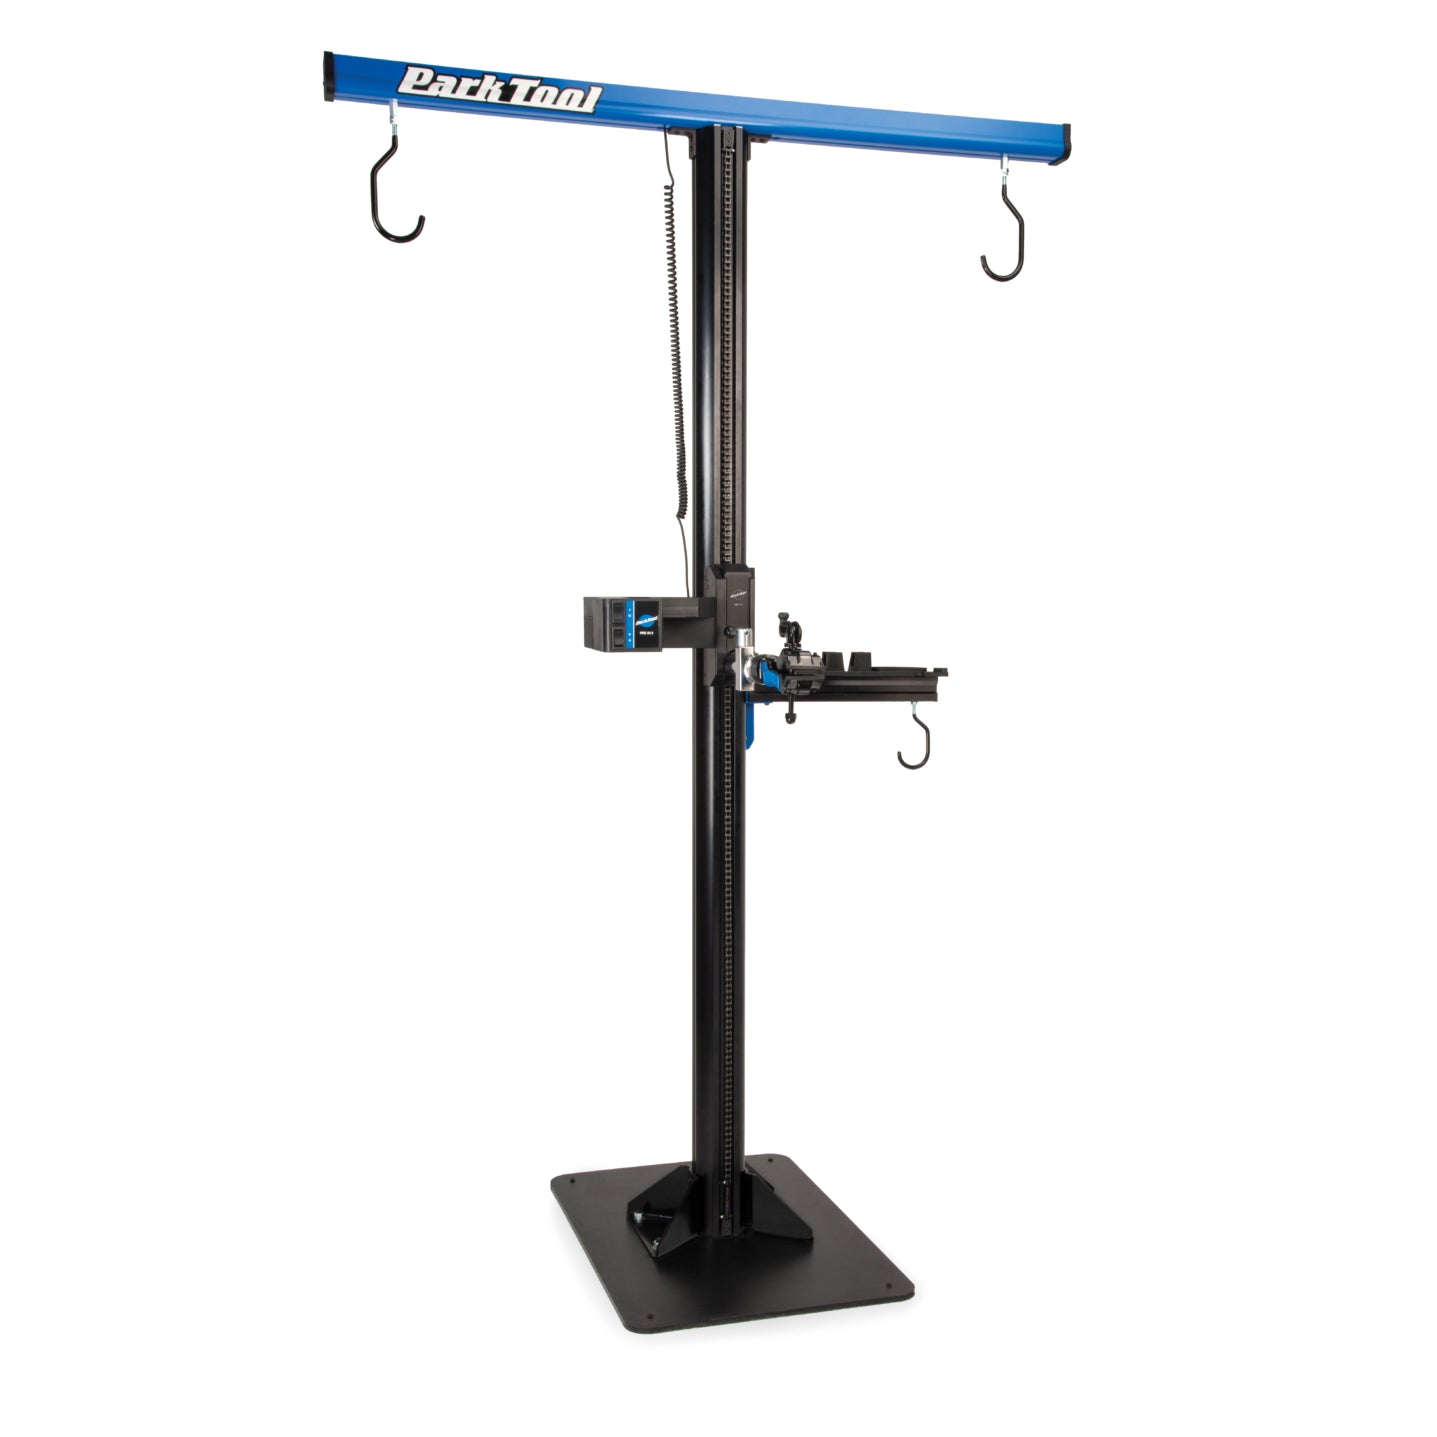 Park Tool PRS-33.2 Power Lift Shop Stand - The Bikesmiths